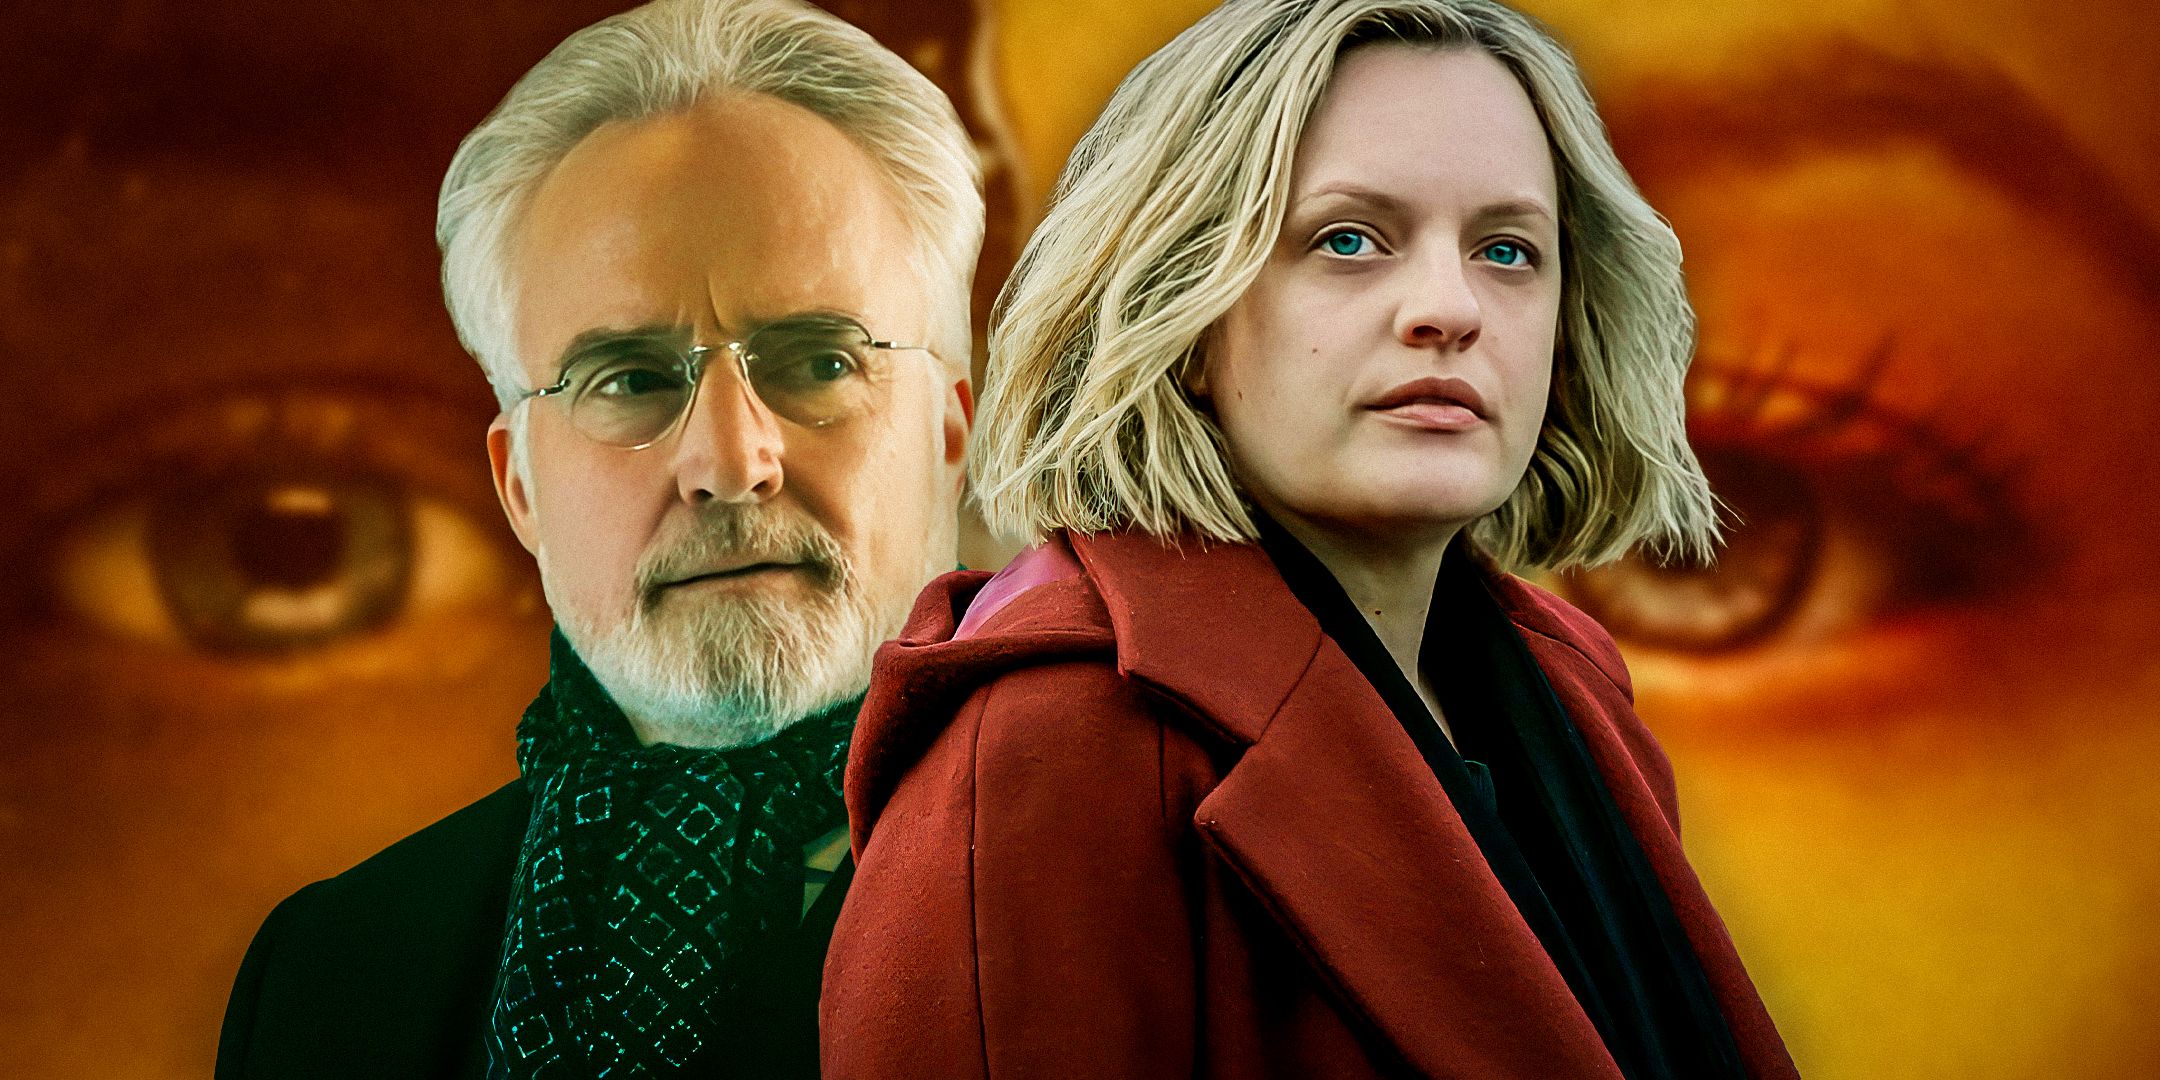 Bradley Whitford as Joseph Lawrence smirking and Elisabeth Moss as June Osborne looking serious in The Handmaid's Tale